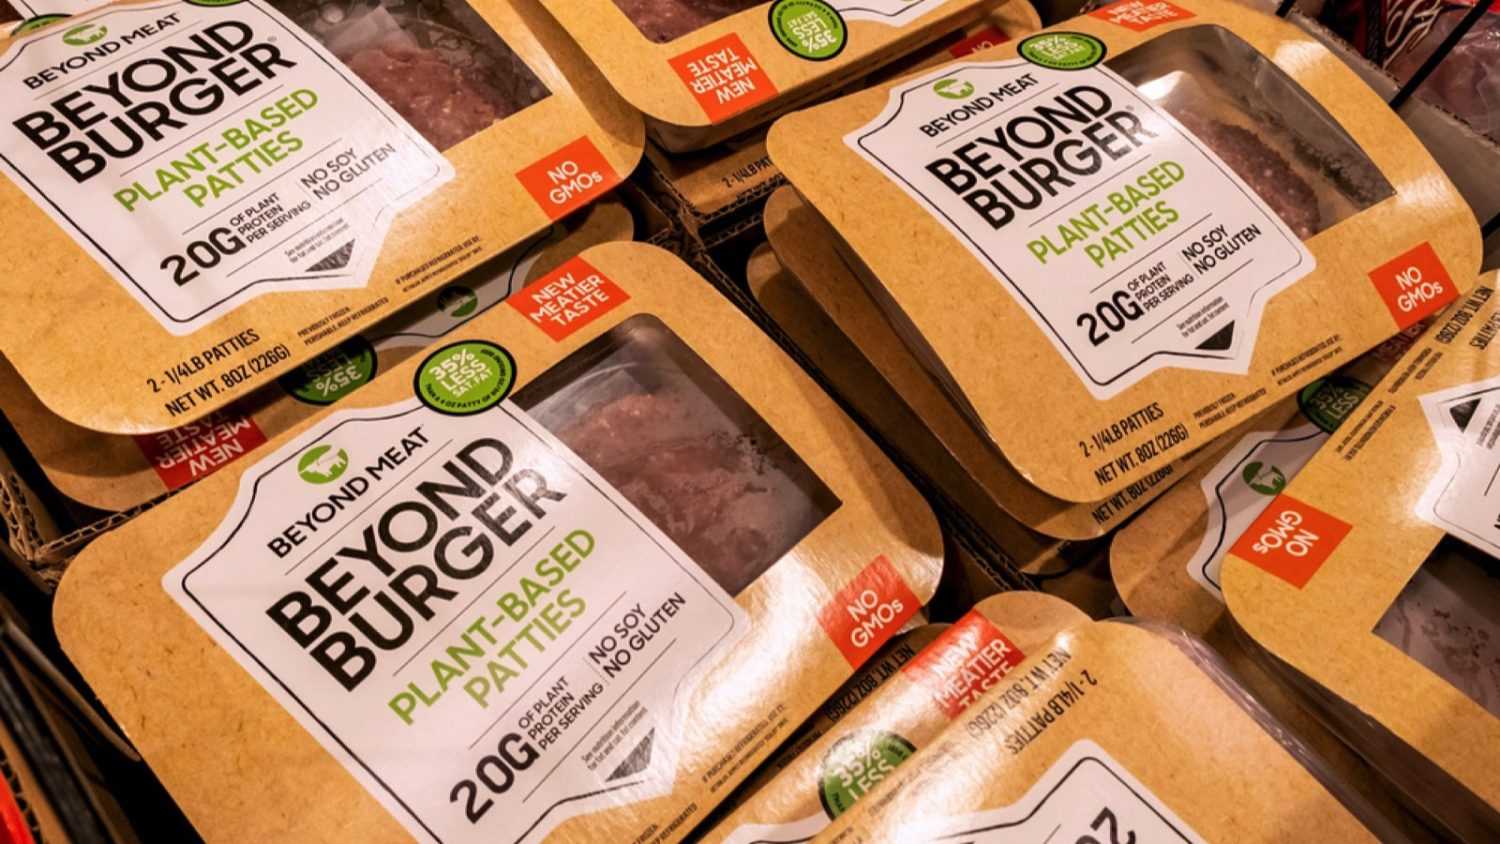 August 2, 2021 Sacramento CA USA - Beyond Burger and Beyond Beef packages, all Beyond Meat products, available for purchase in a supermarket in California, USA